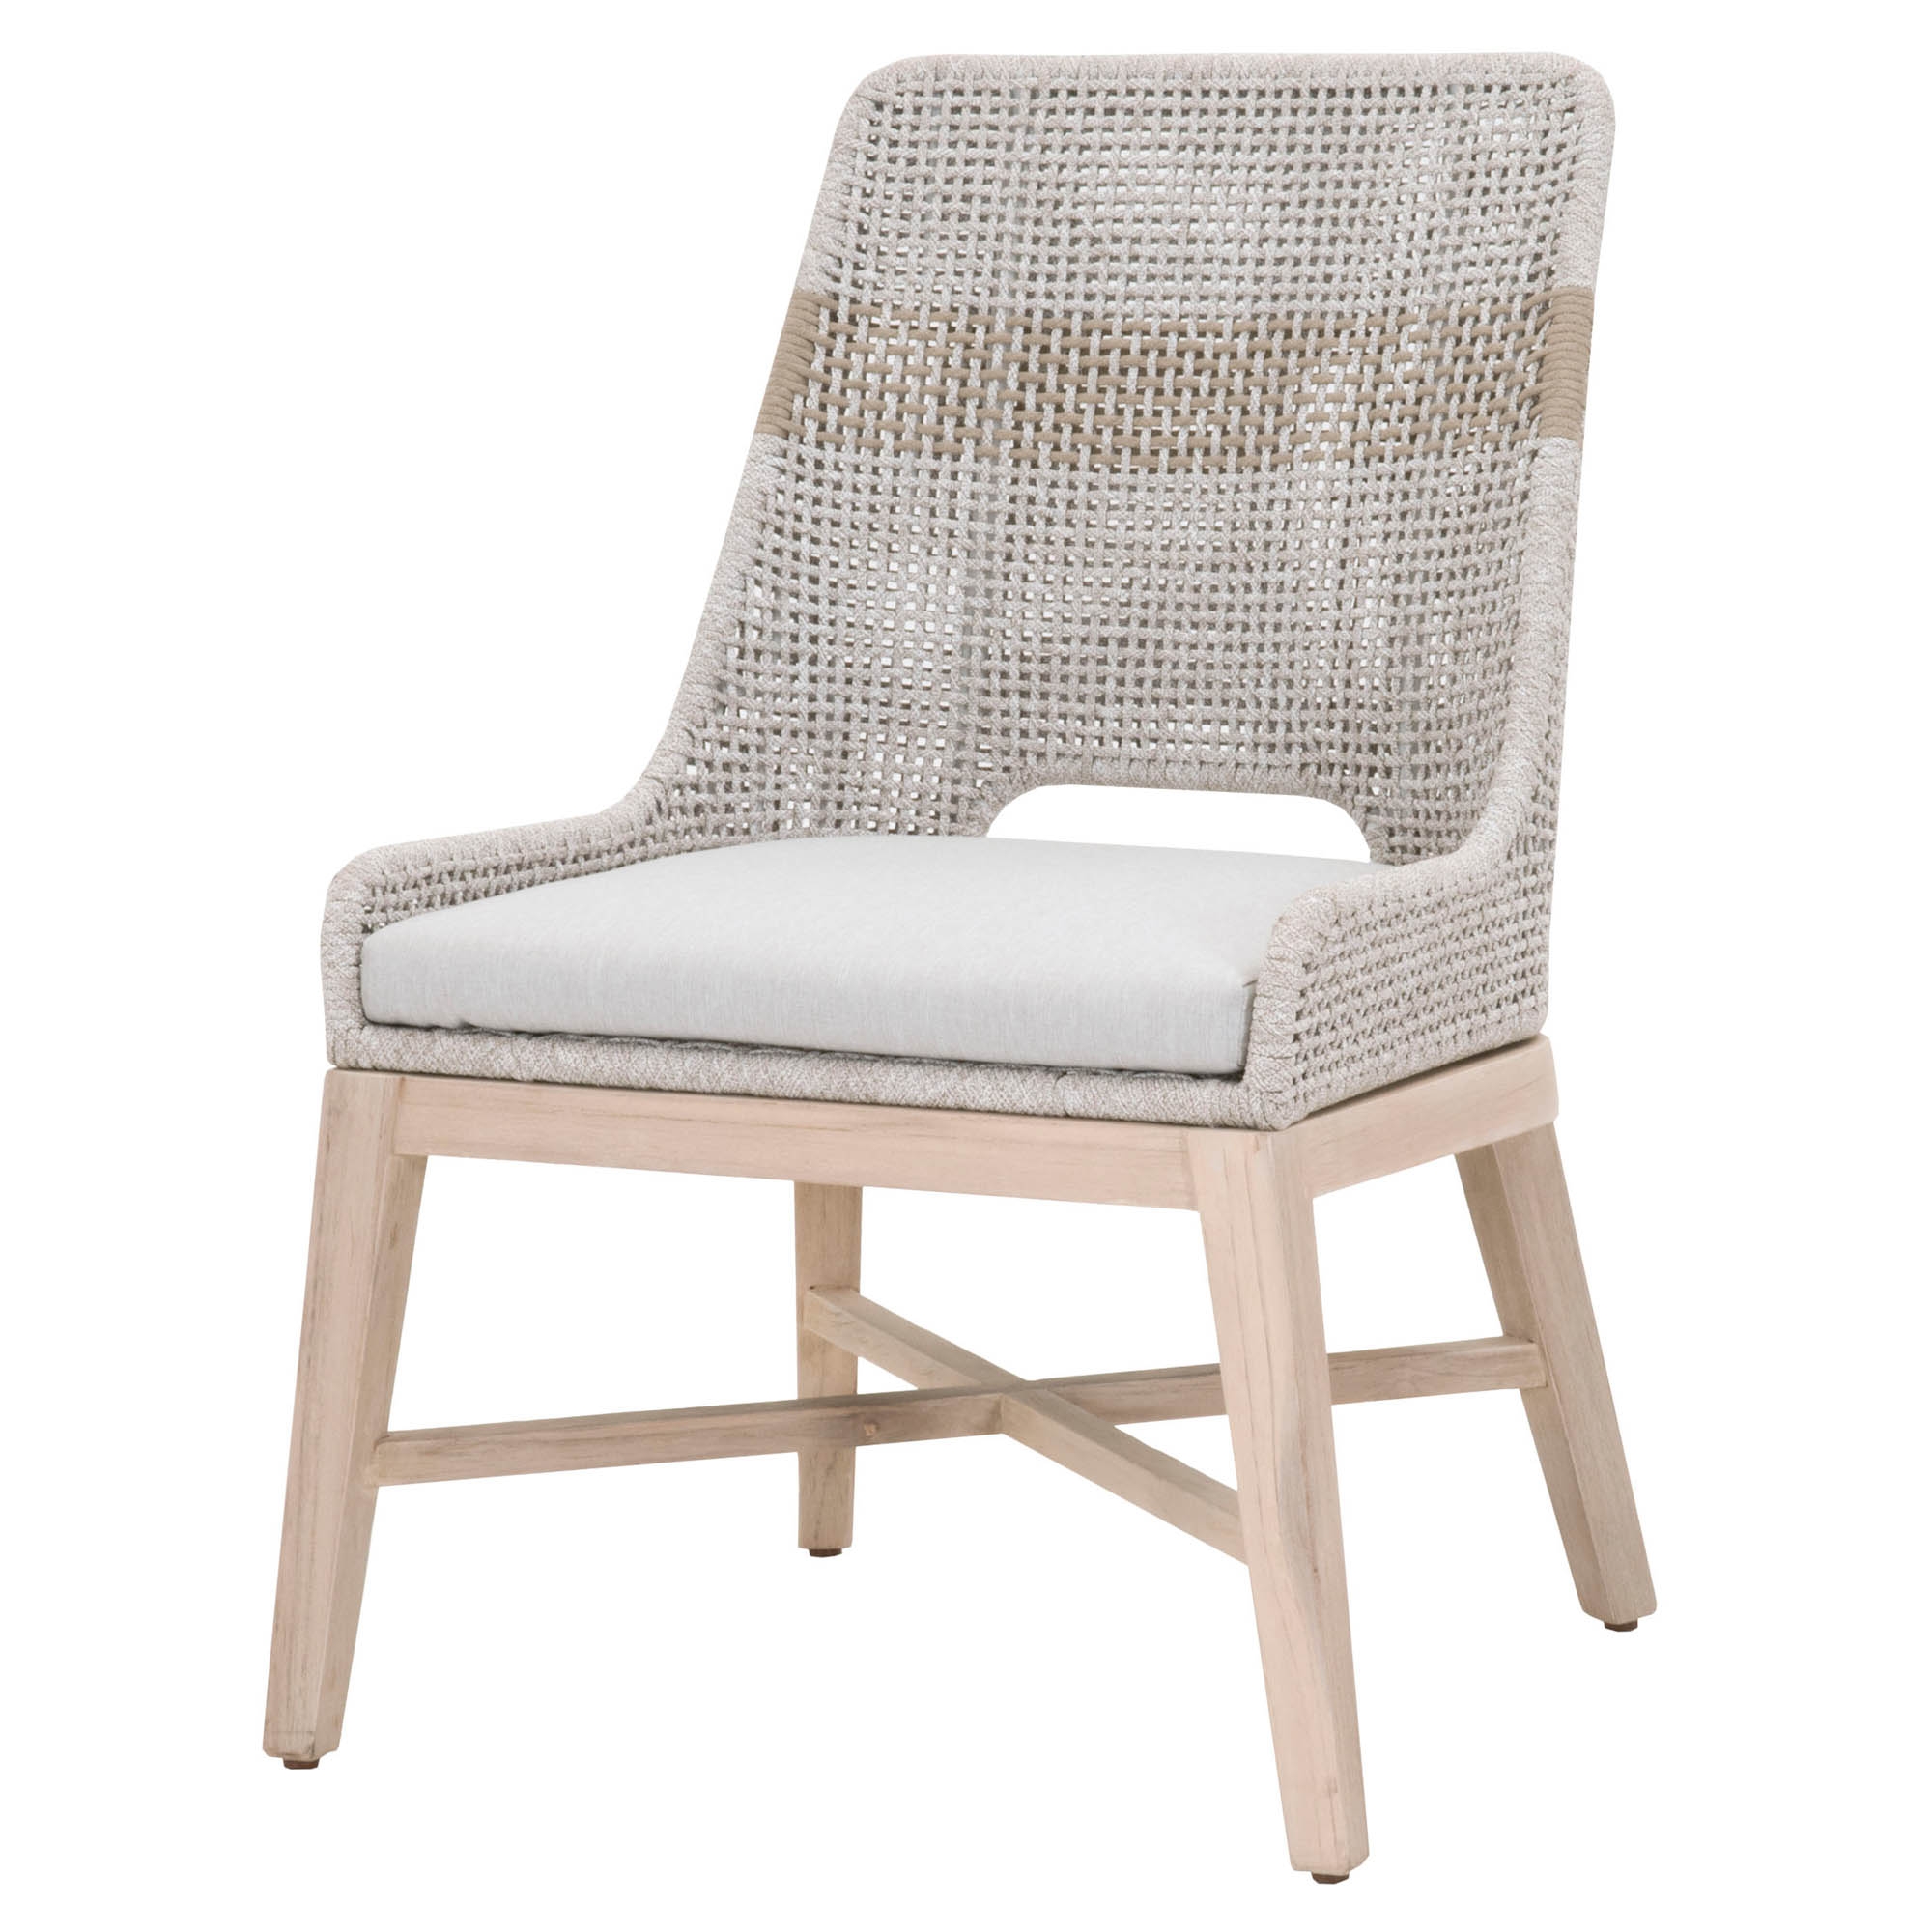 Tapestry Outdoor Dining Chair, Gray, Set of 2 - Image 1